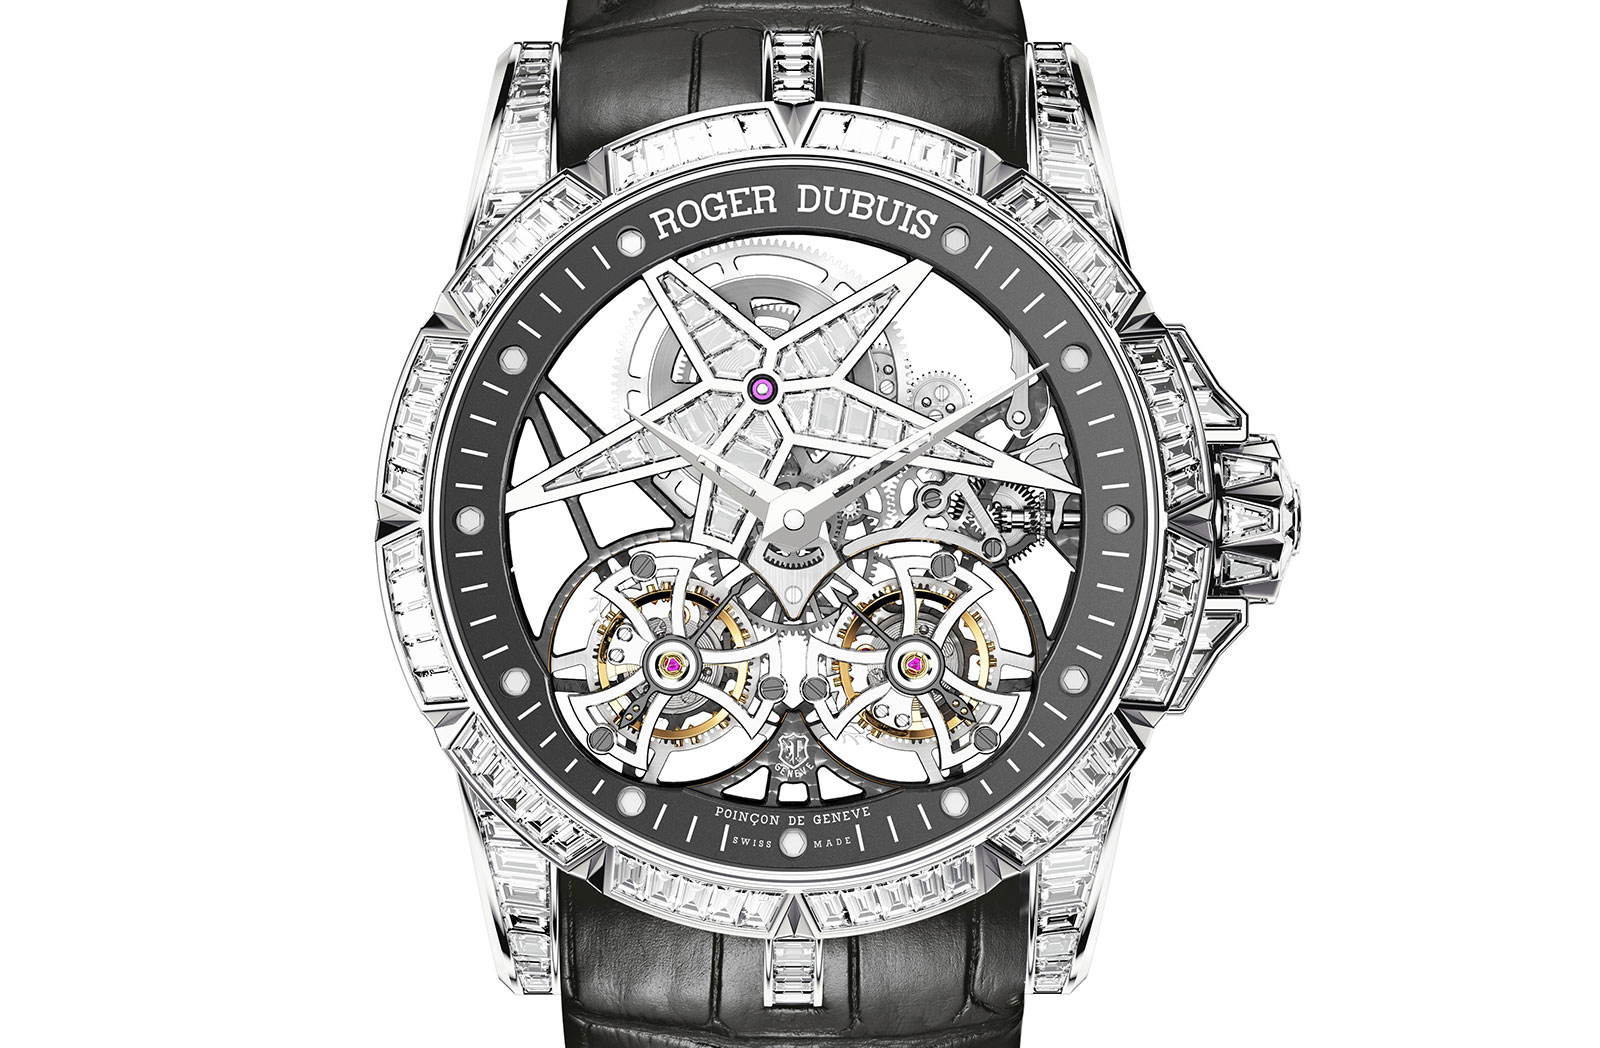 Roger star of infinity dubuis Double tourbillon watch